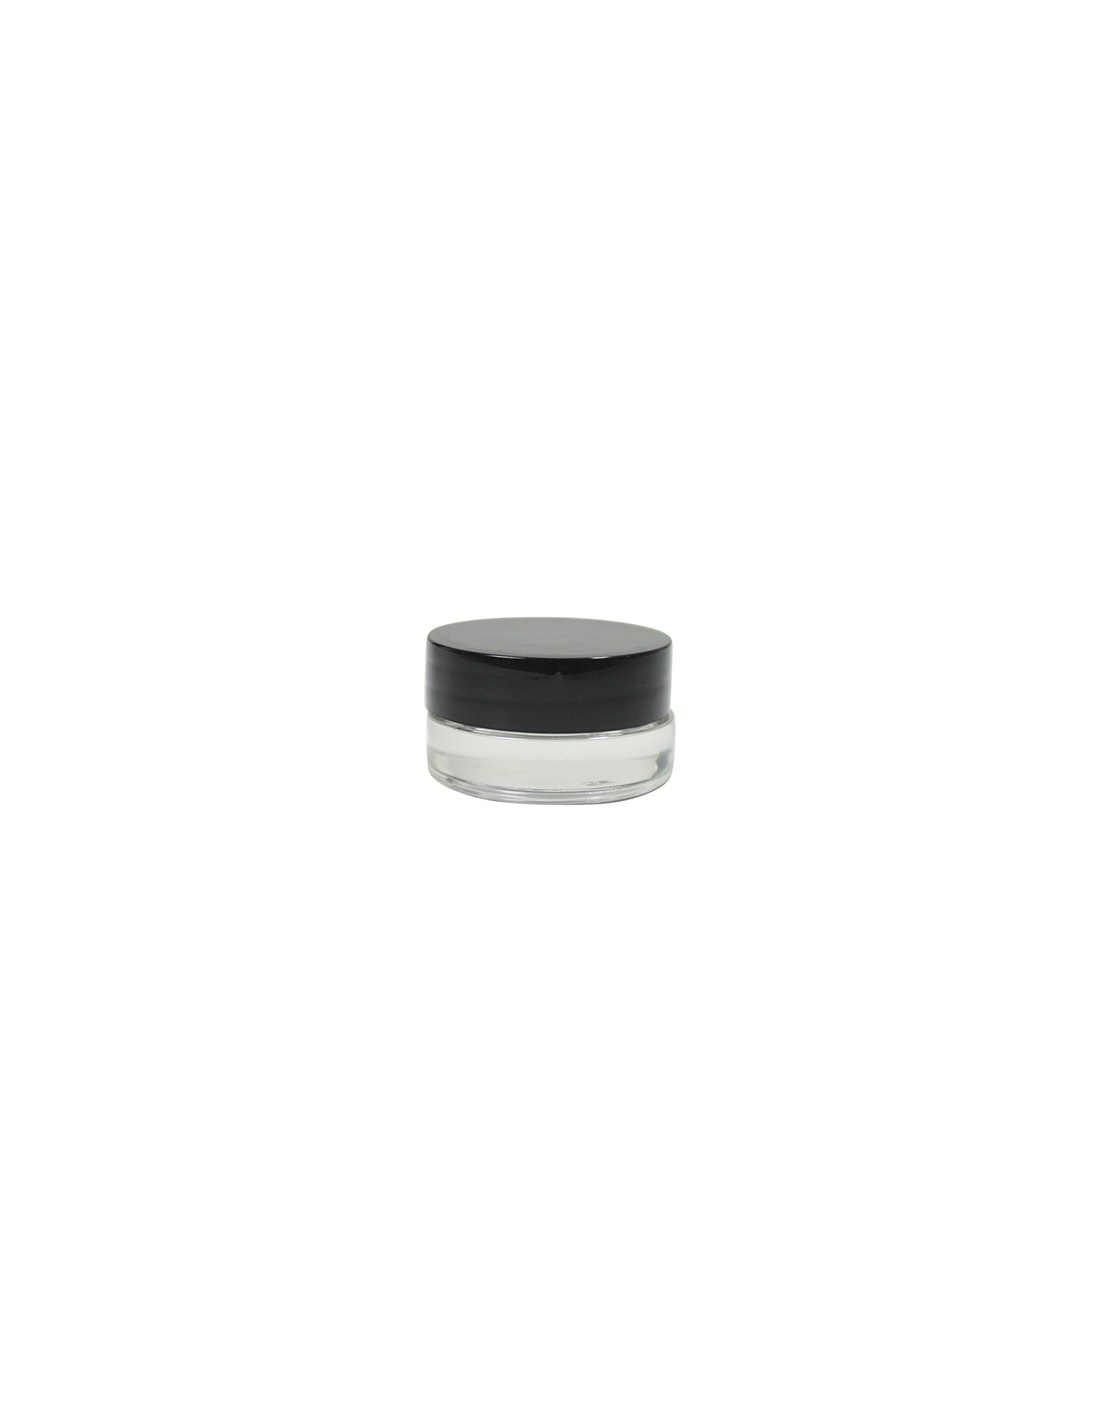 glass-container-with-black-cap-5ml- ok 2